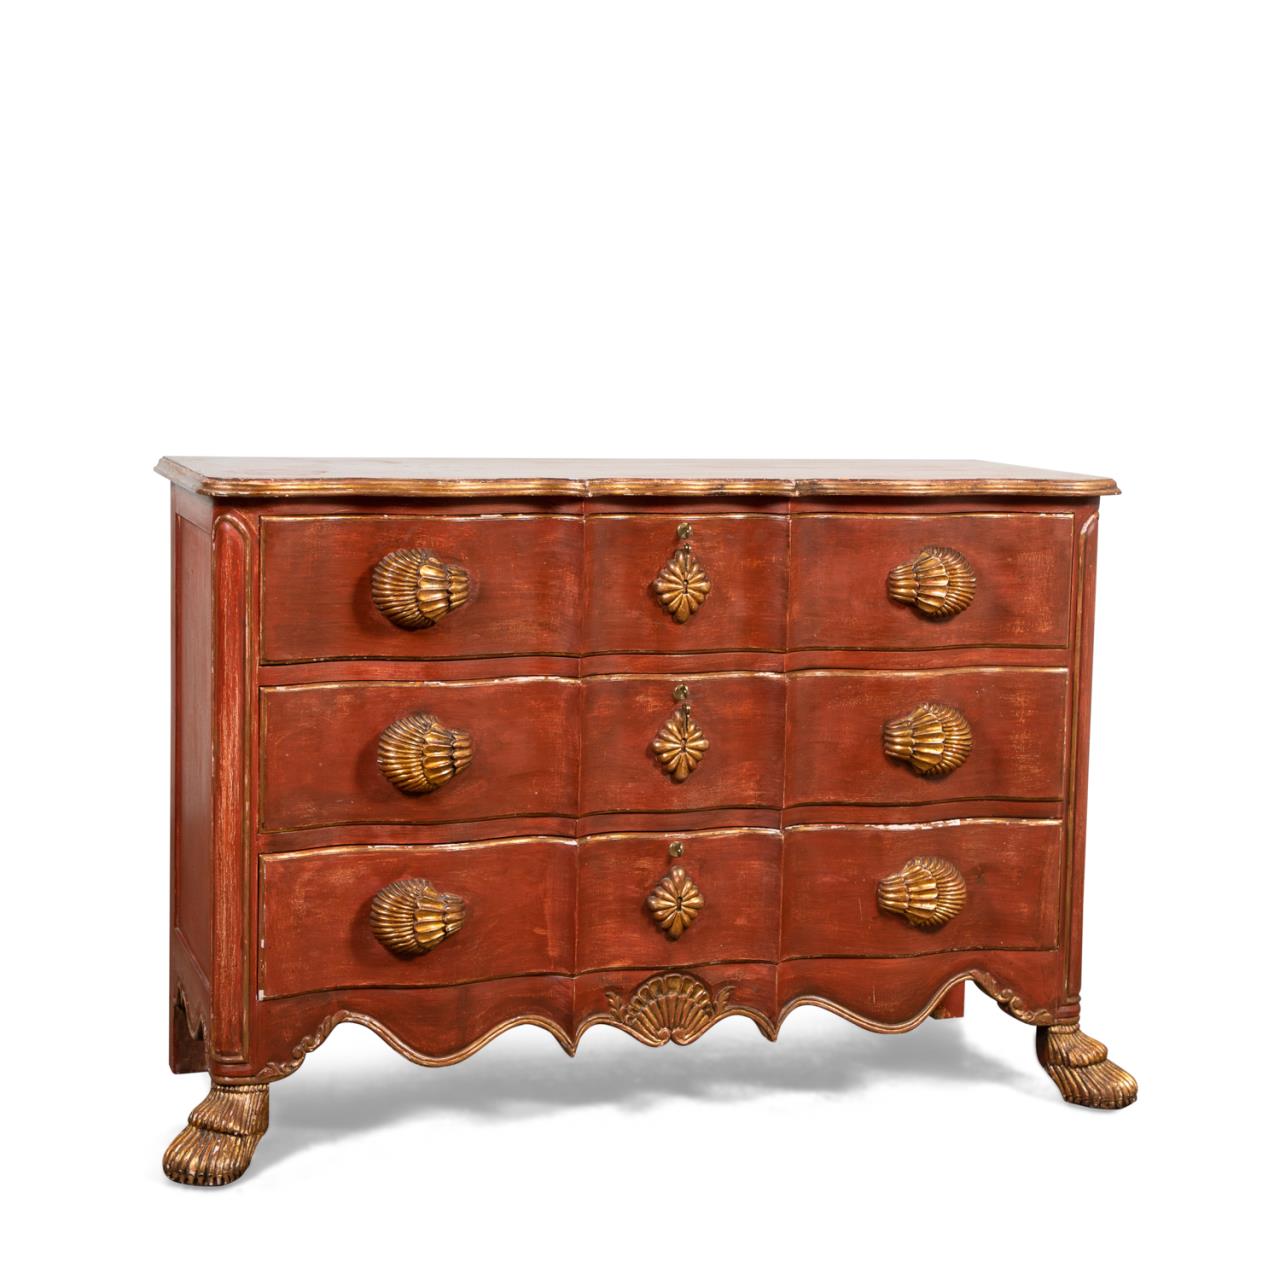 BAROQUE STYLE RED GILT PAINTED 3590a9